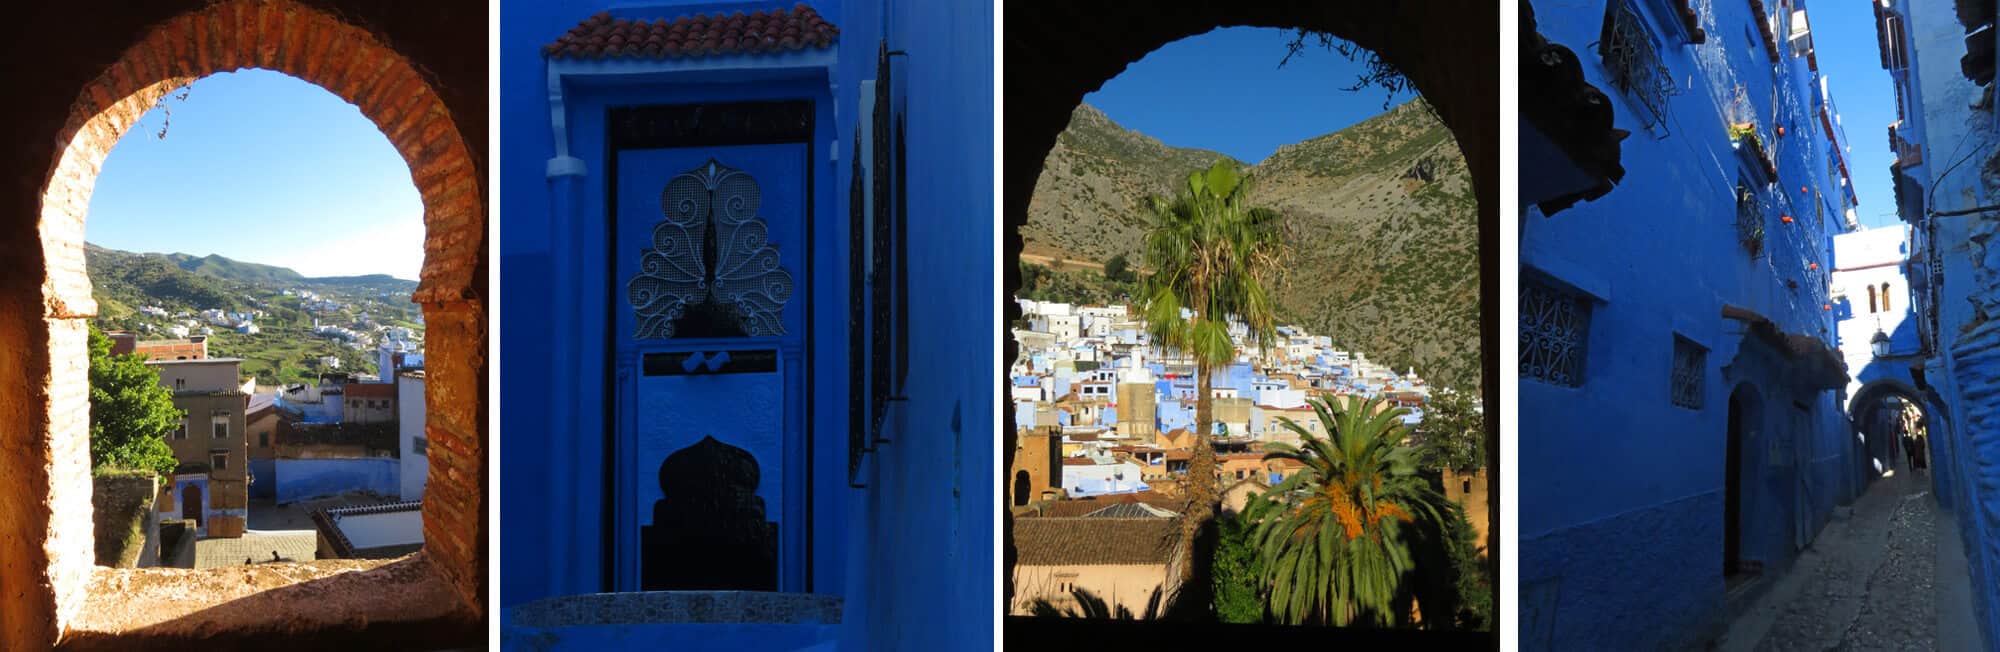 Highlights and bedbugs in Chefchaouen